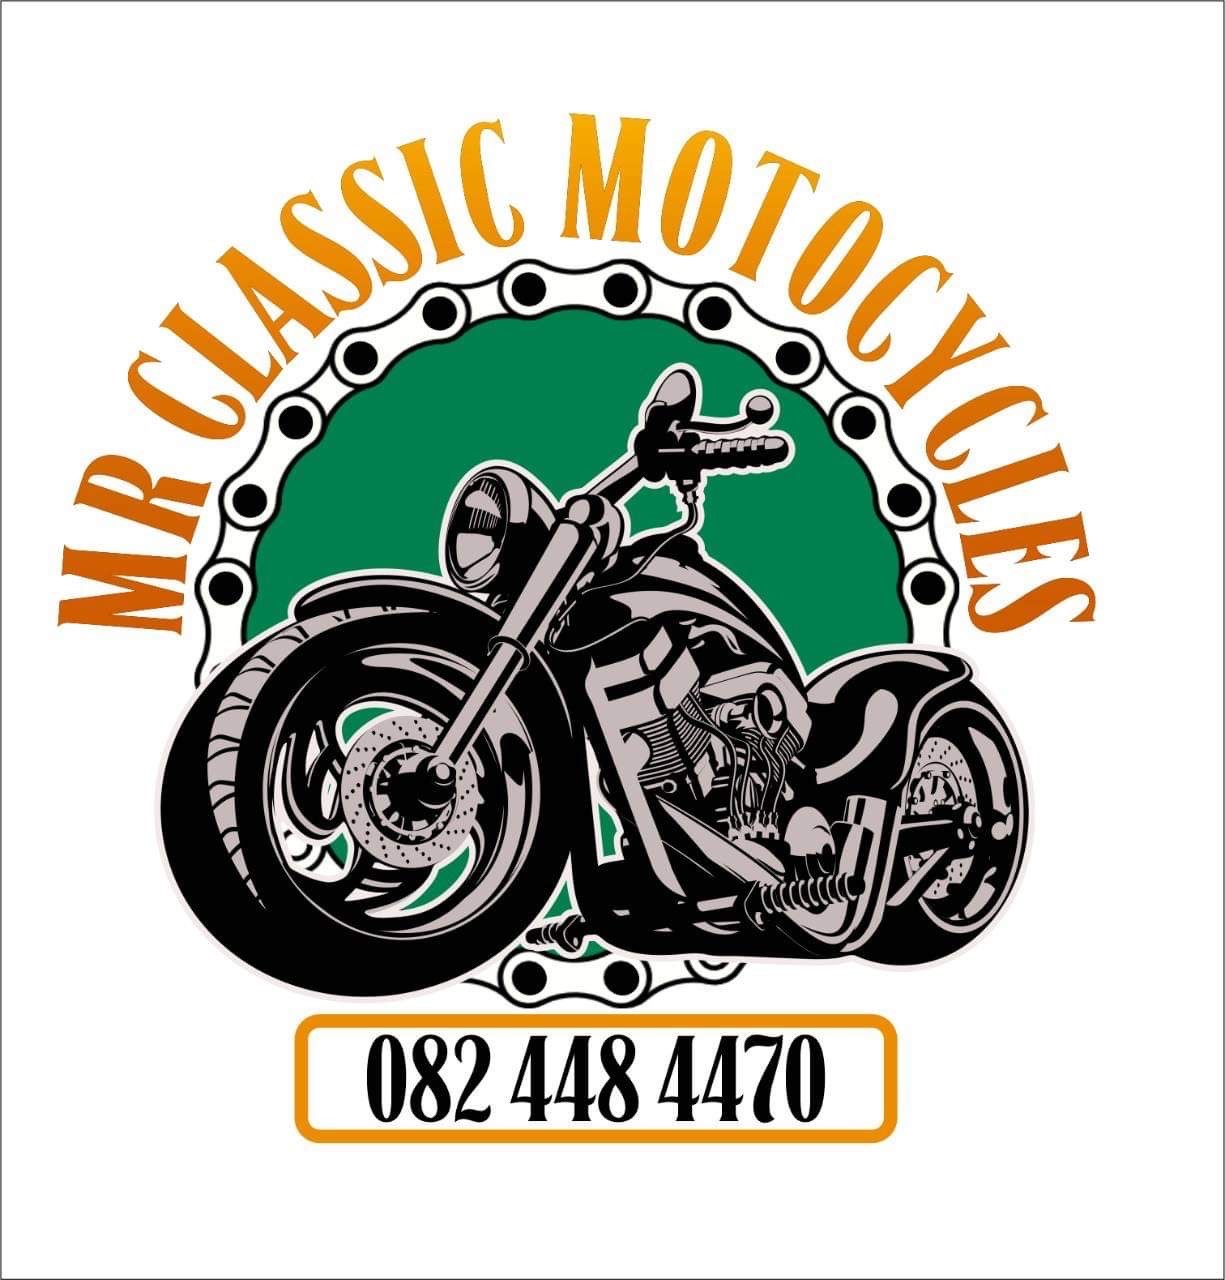 Mr. Classic Motorcycles